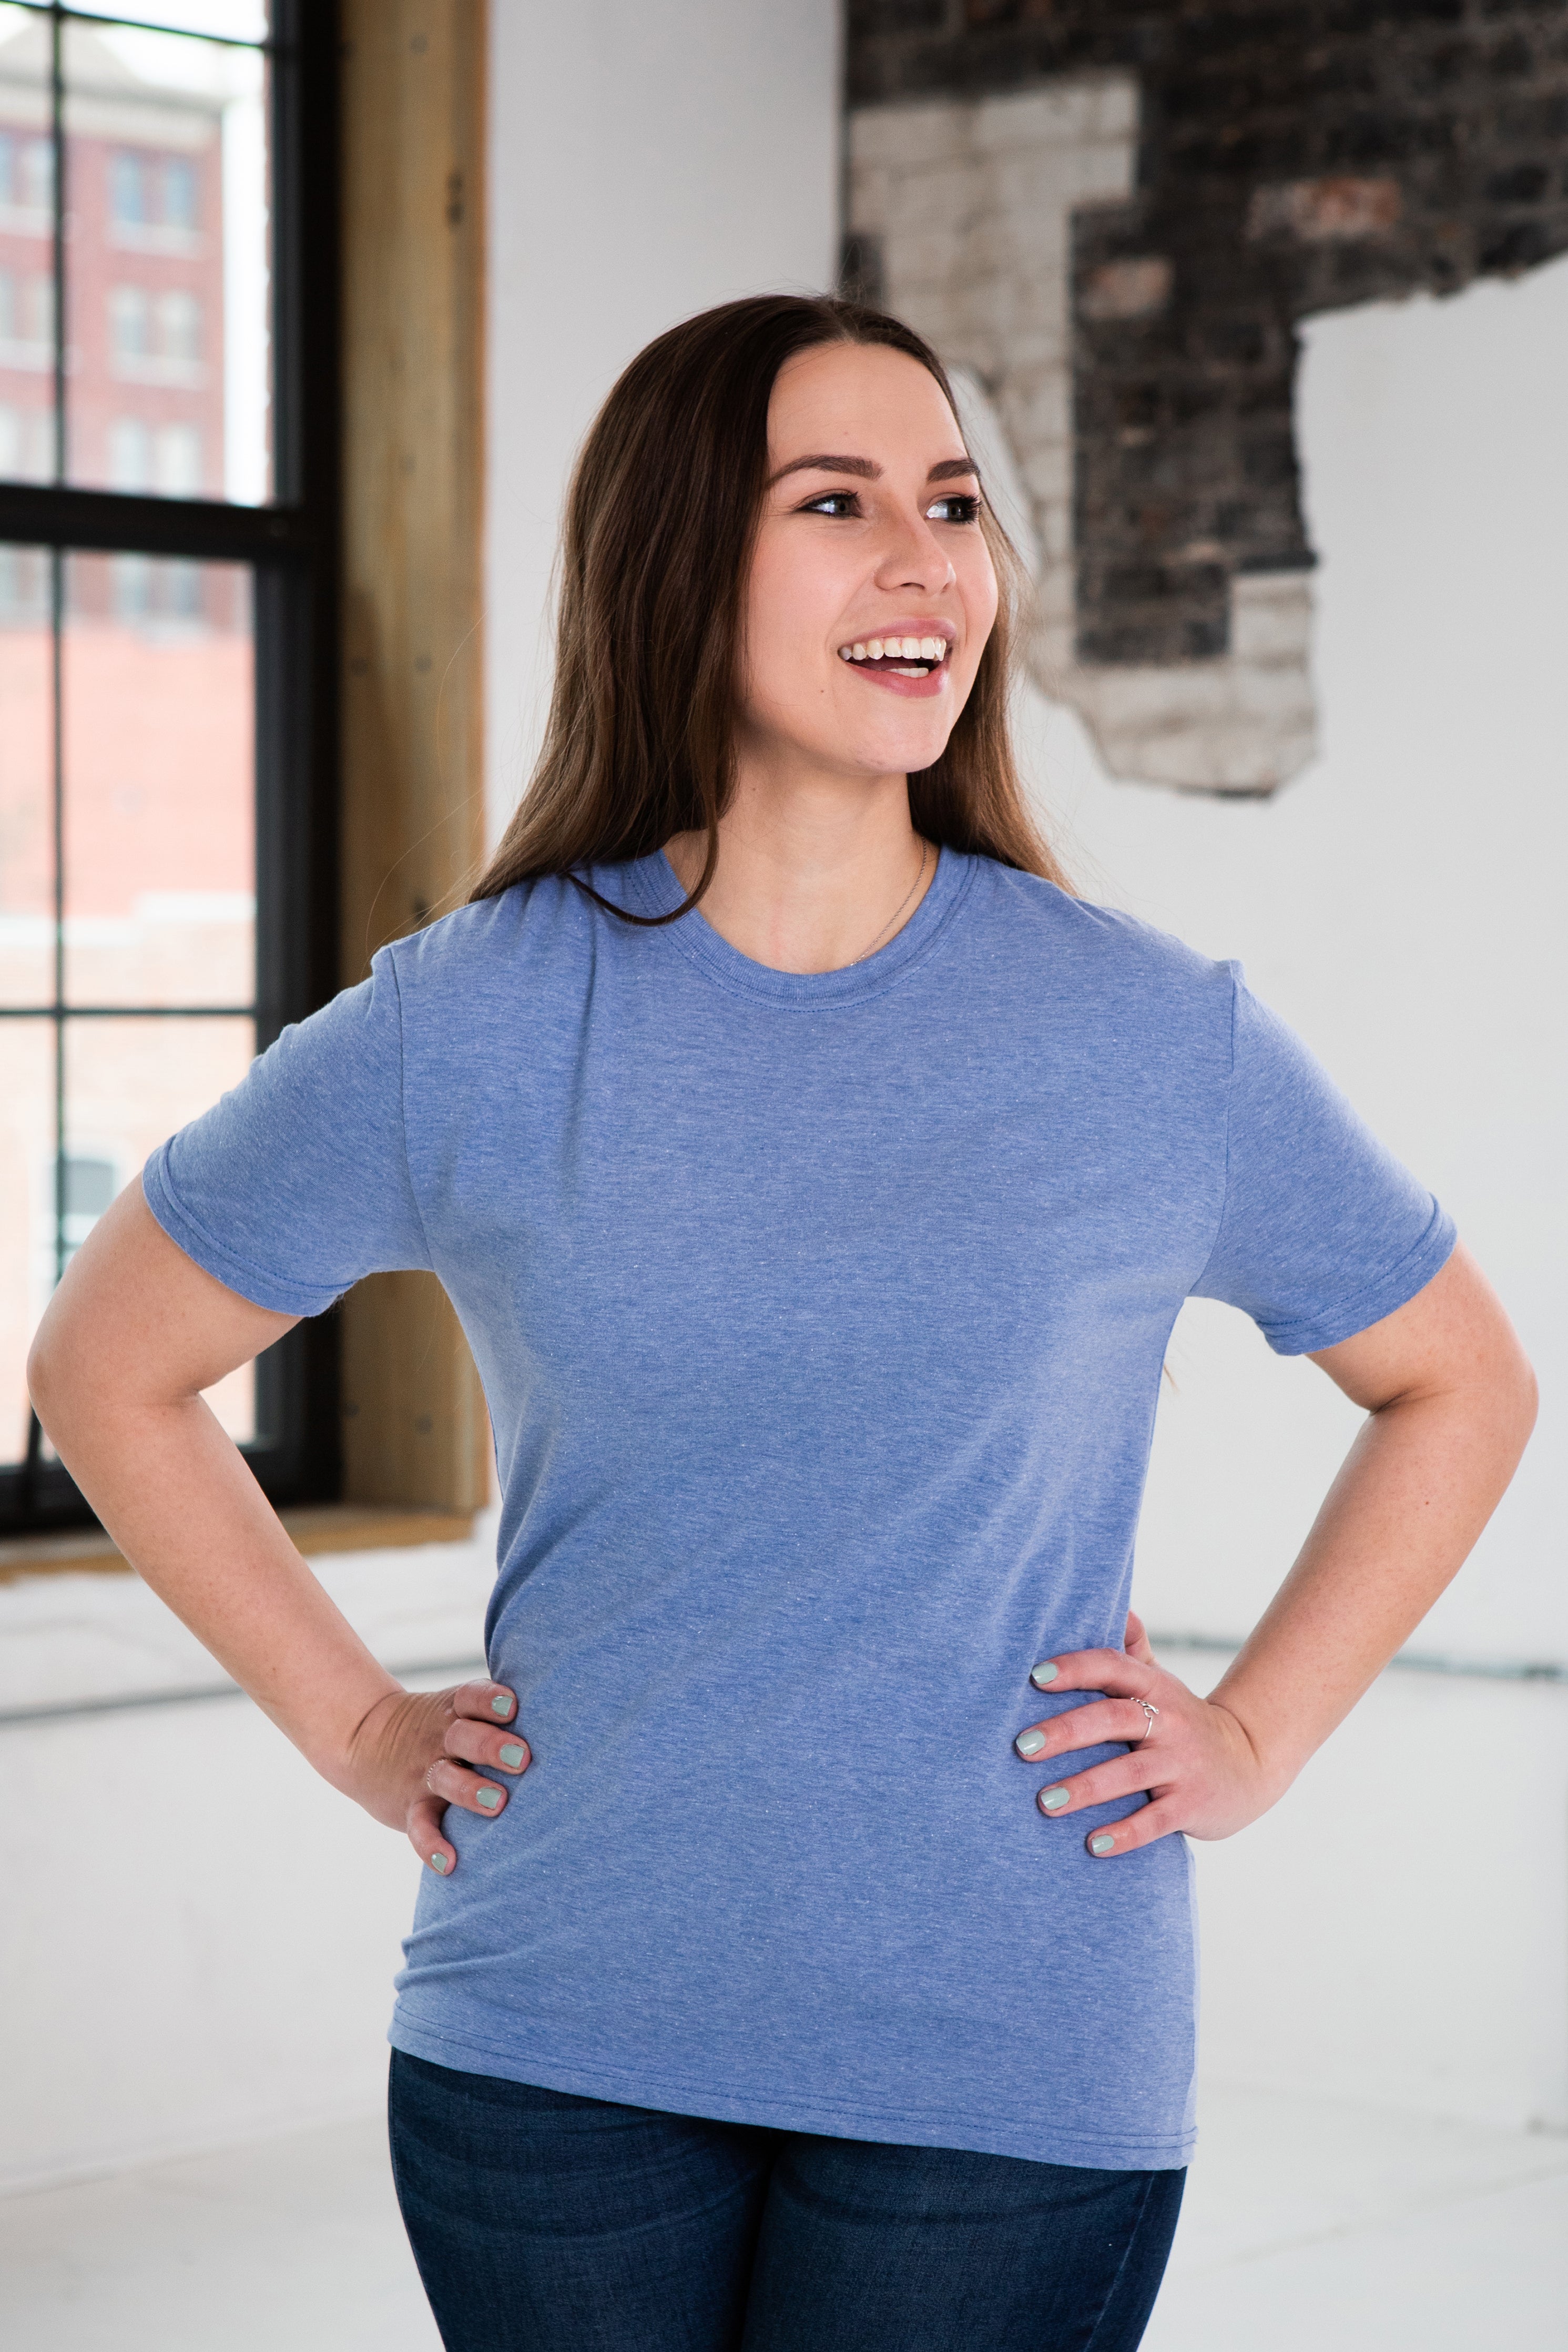 Female Model wearing GOEX Eco Triblend Unisex and Men's Tee in Light Blue